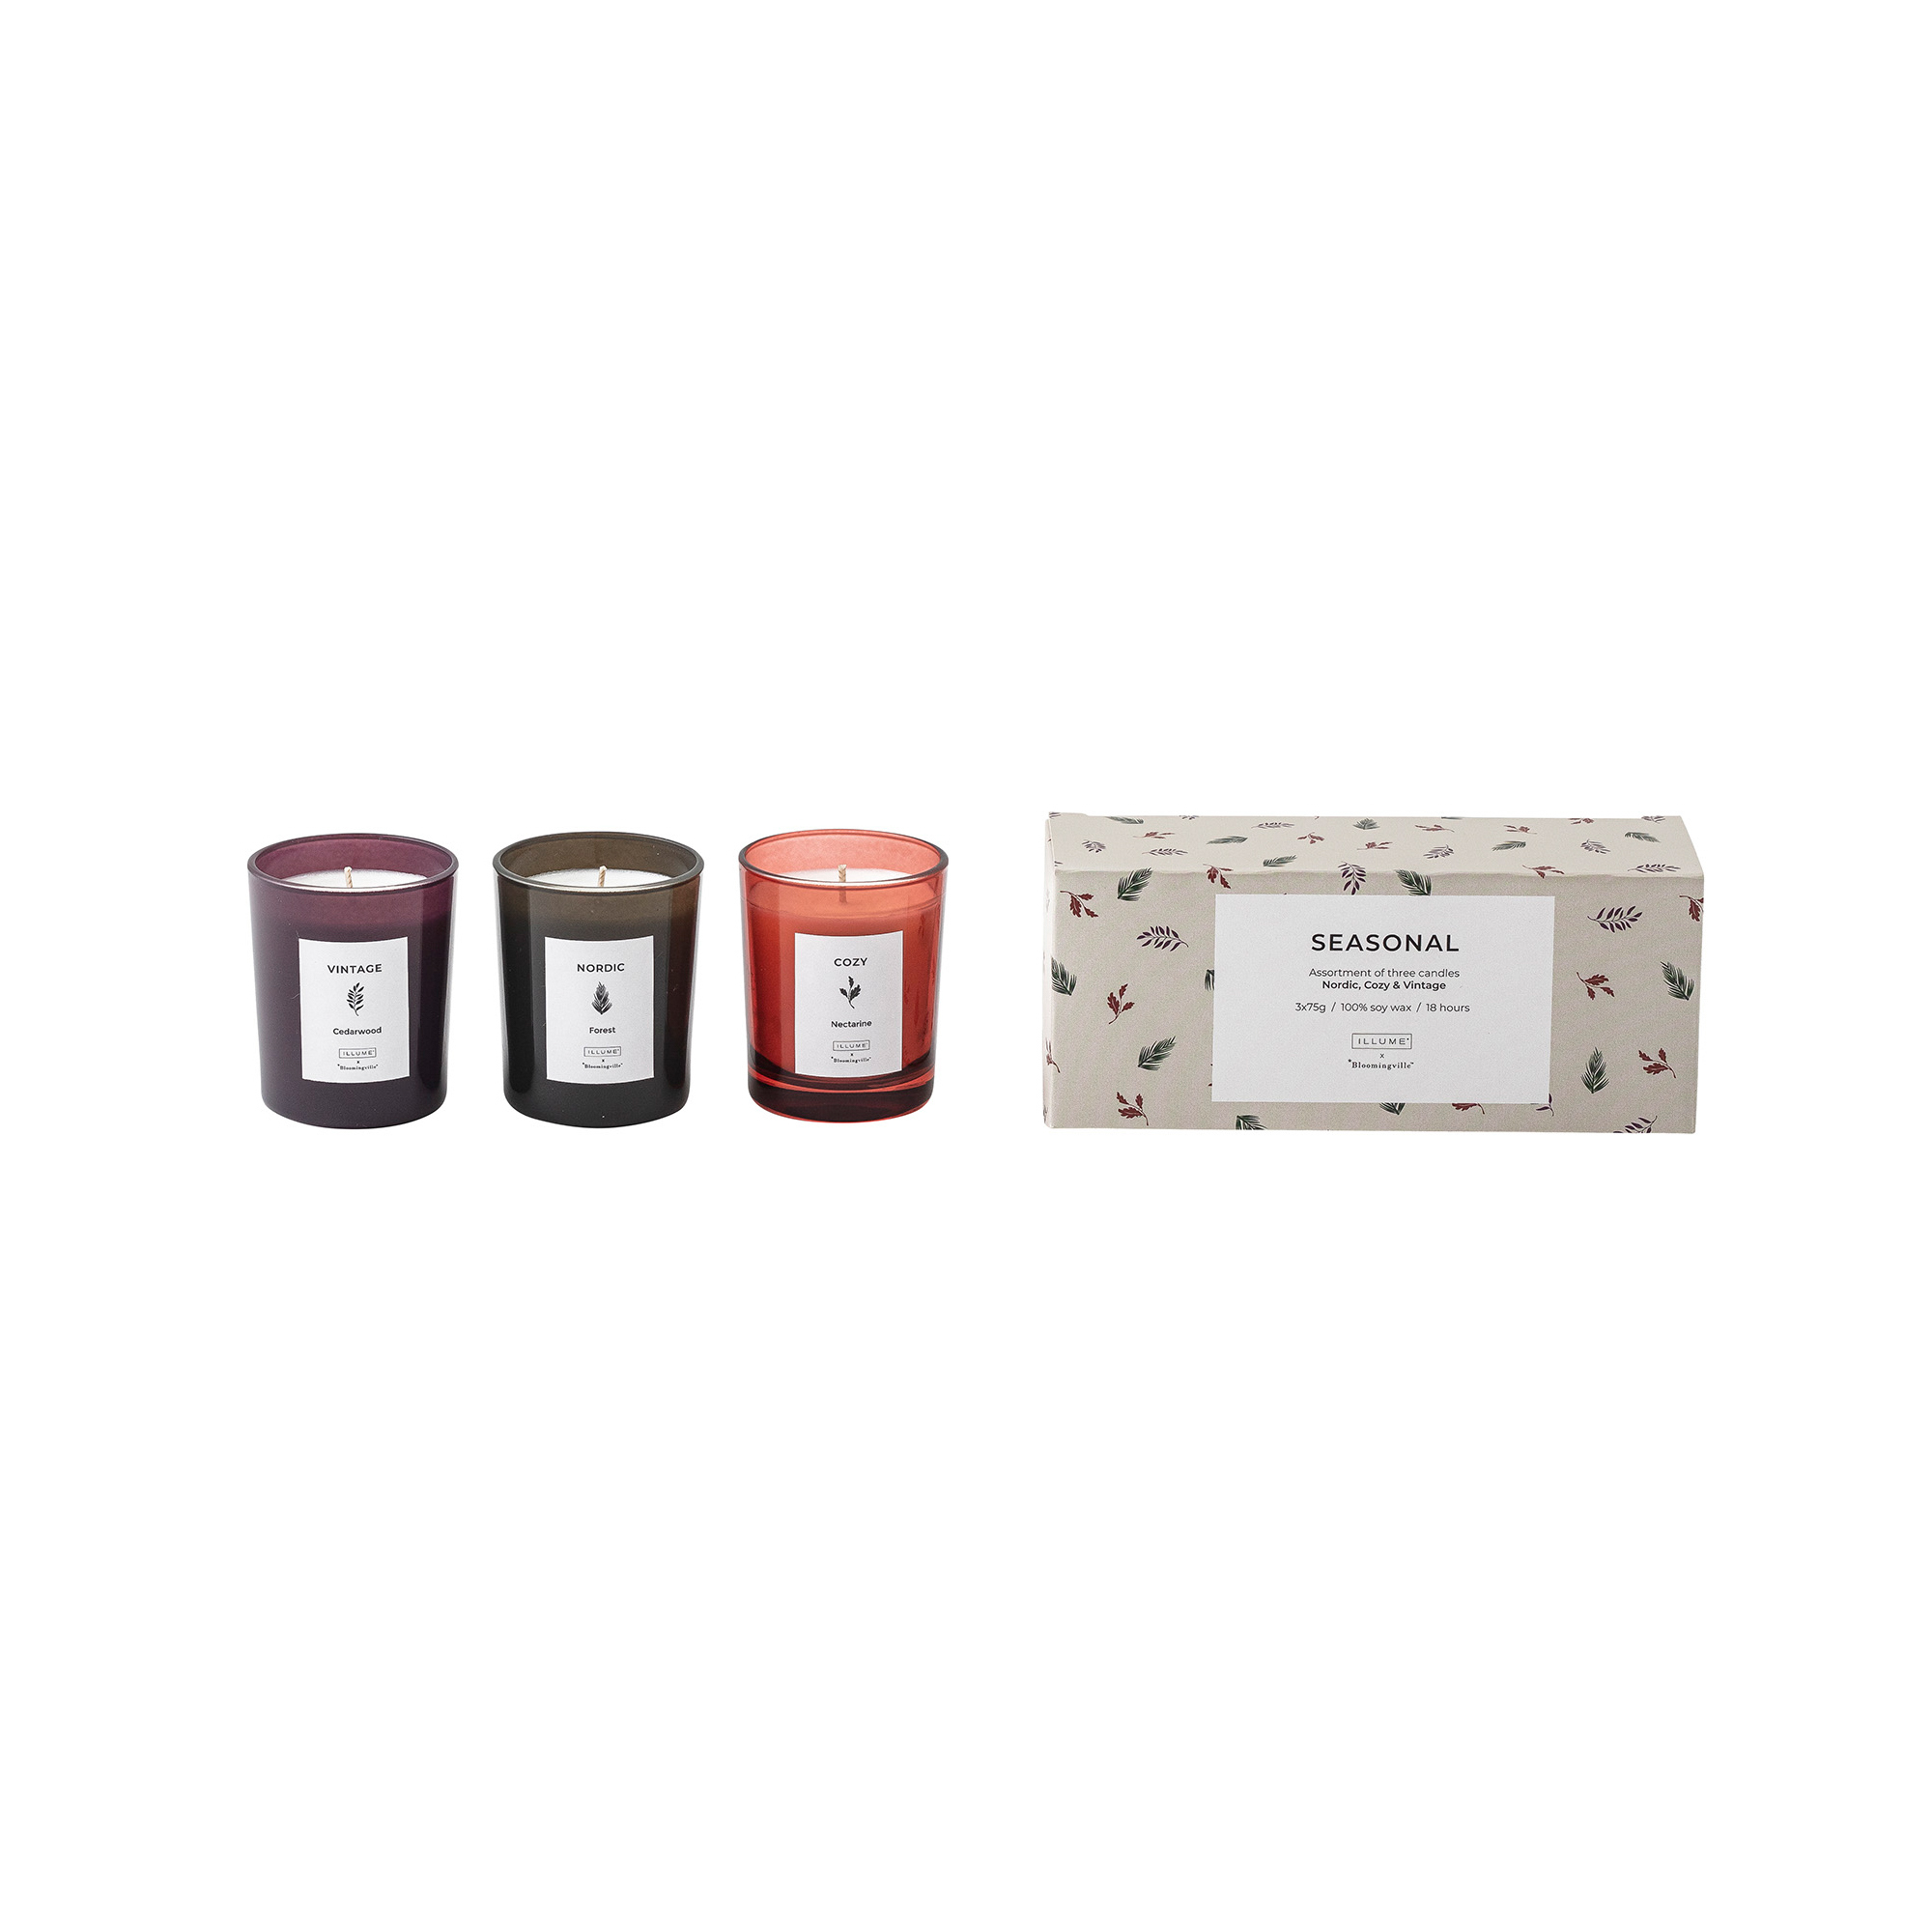 Seasonal Scented Candle 3-Pack